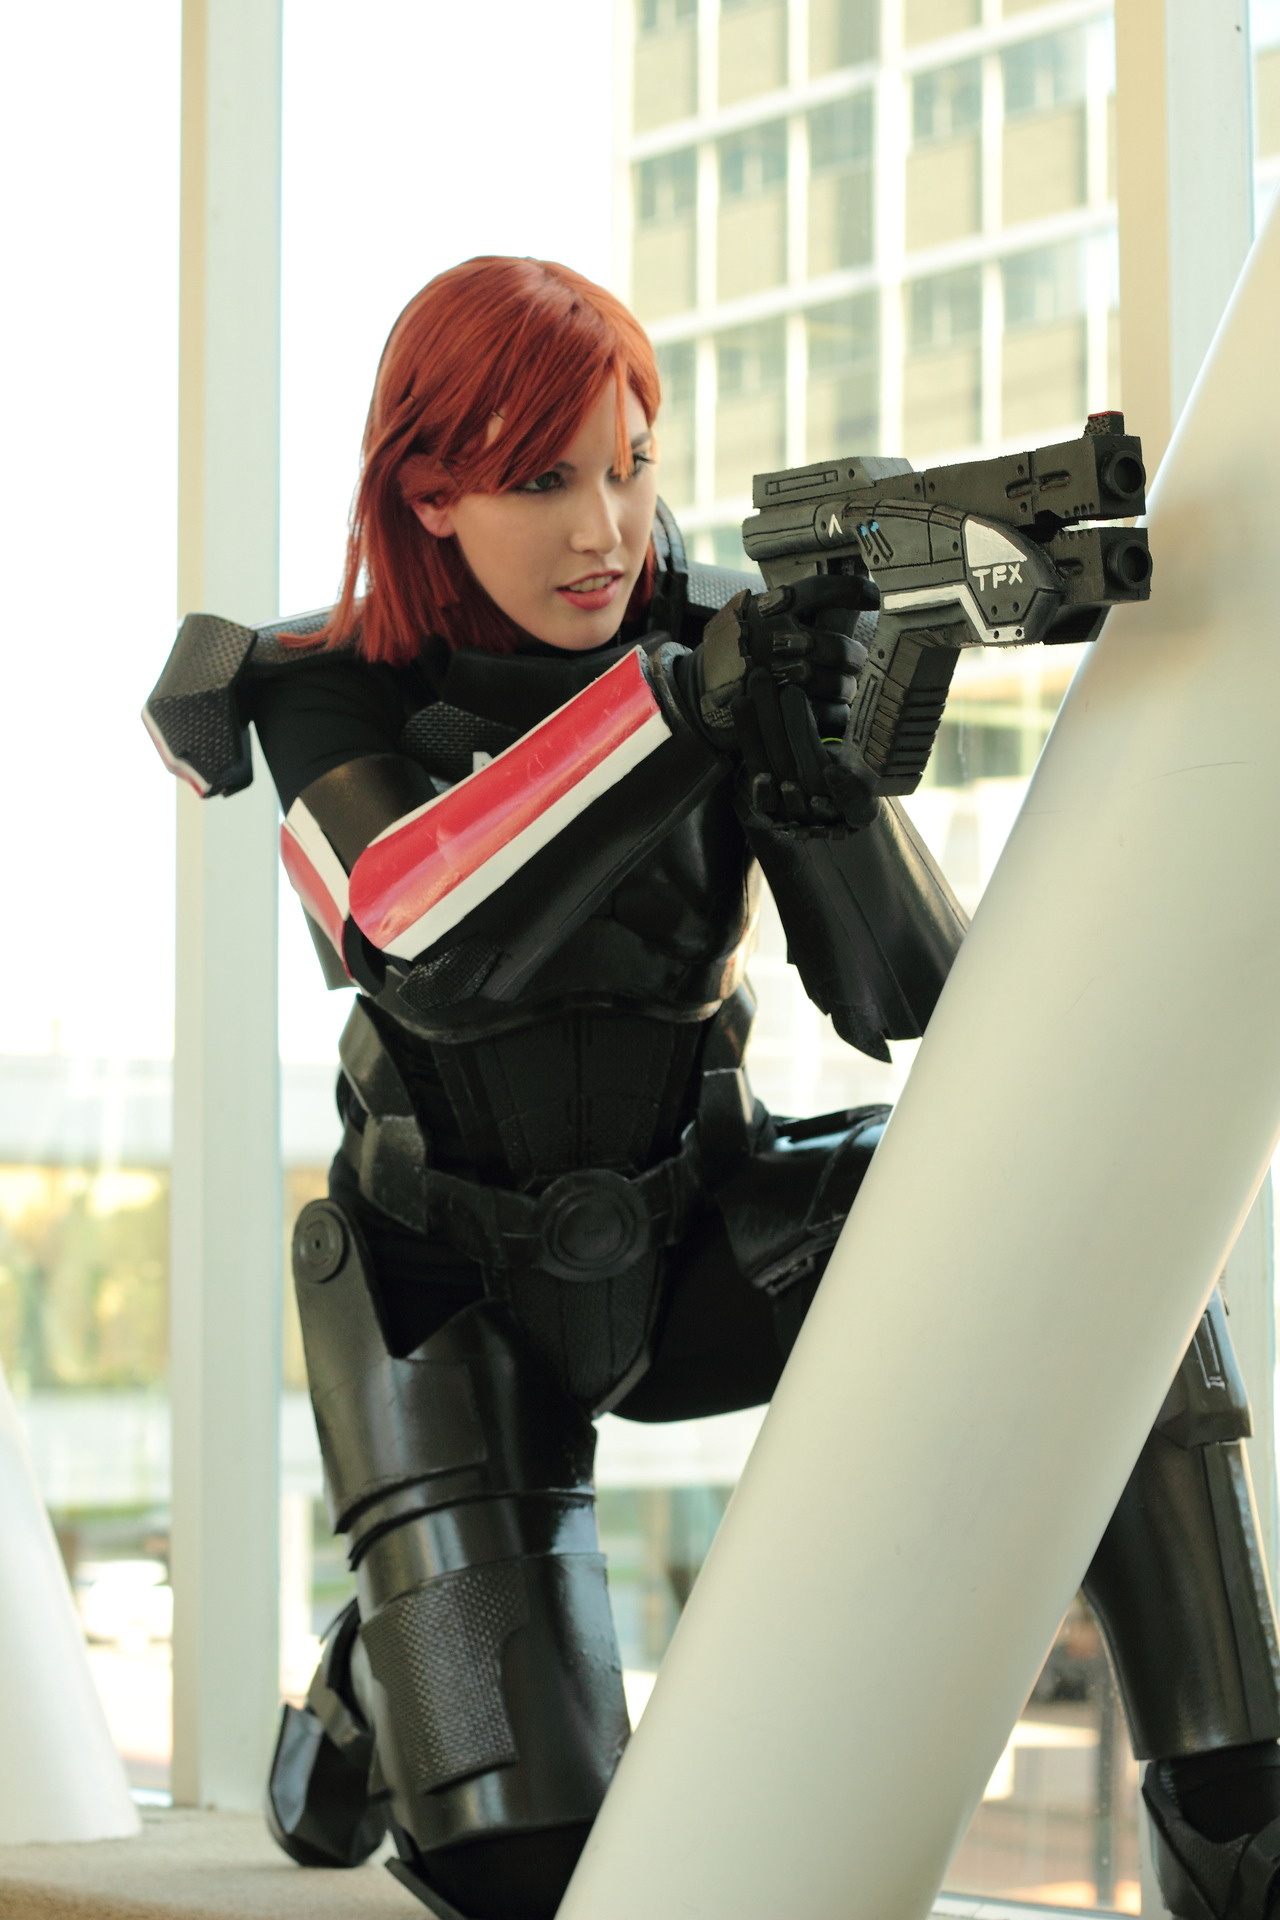 Awesome photo of my FemShep by my friend Makenchi
Armor by my friend HoiHoiSan